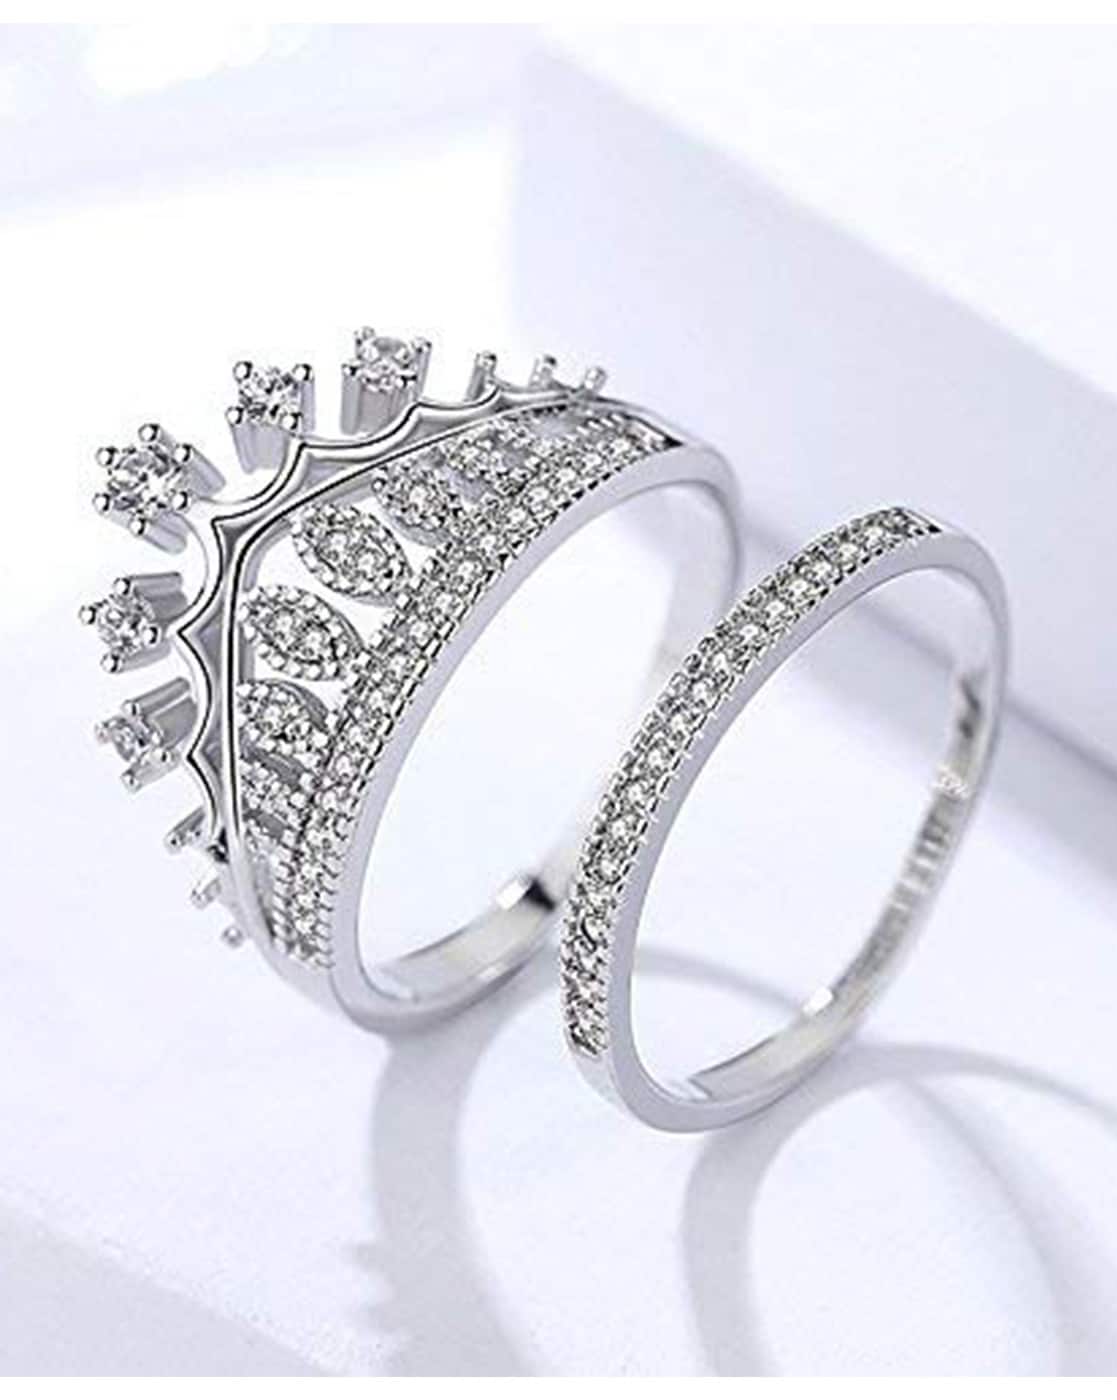 Princess crown ring for men made of sterling silver 925 Gothic style - Shop  jacksclub General Rings - Pinkoi